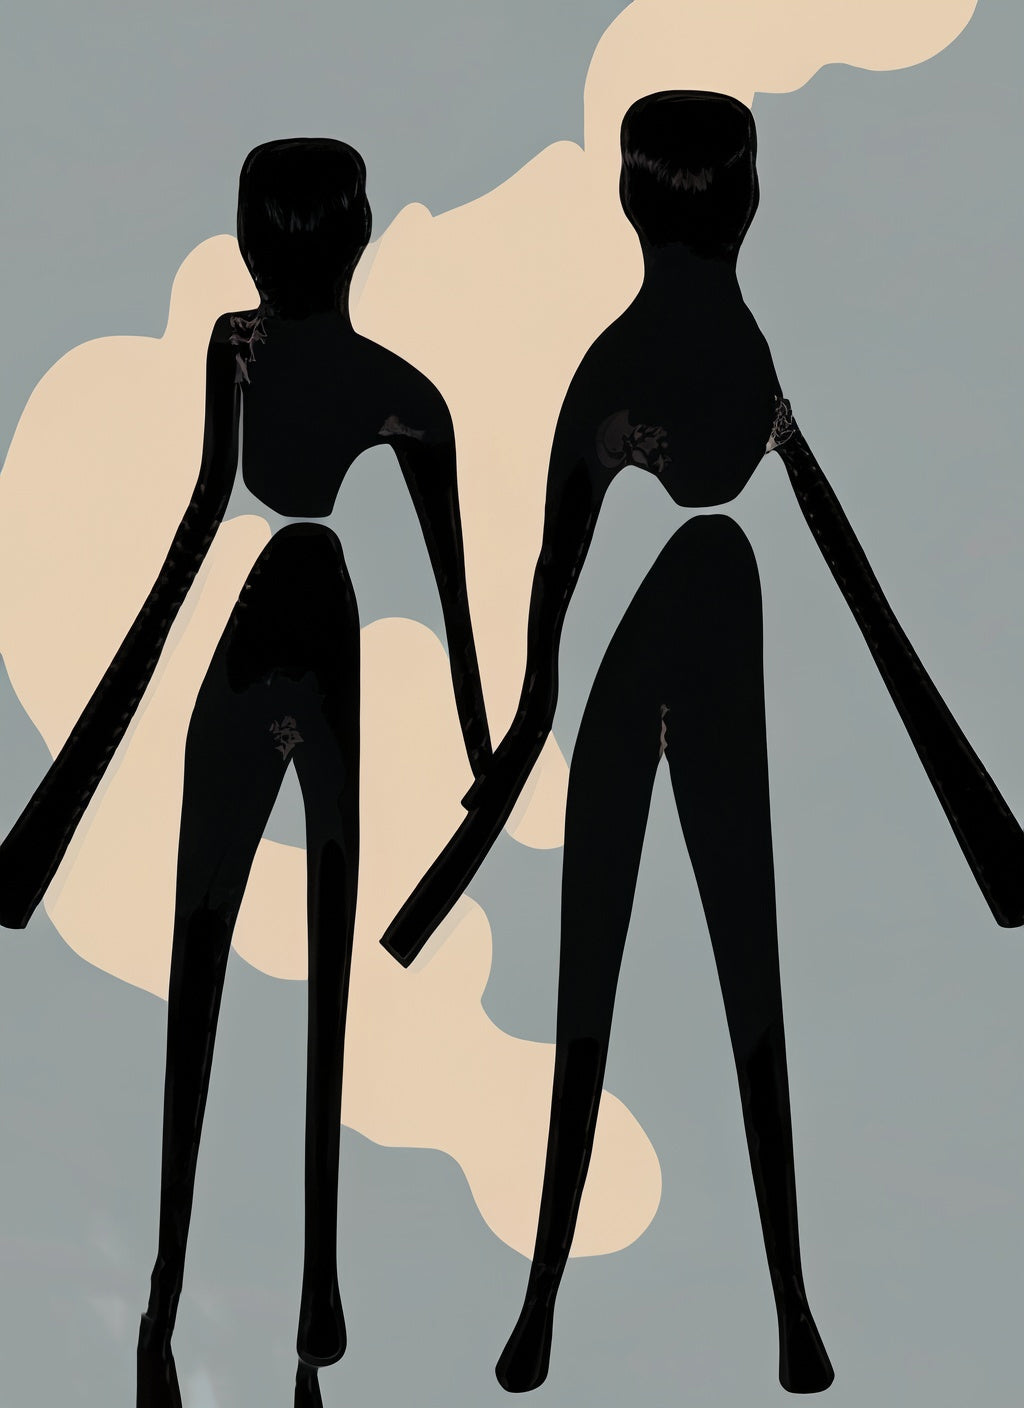 Two Black Figures Abstract Illustration Art Print